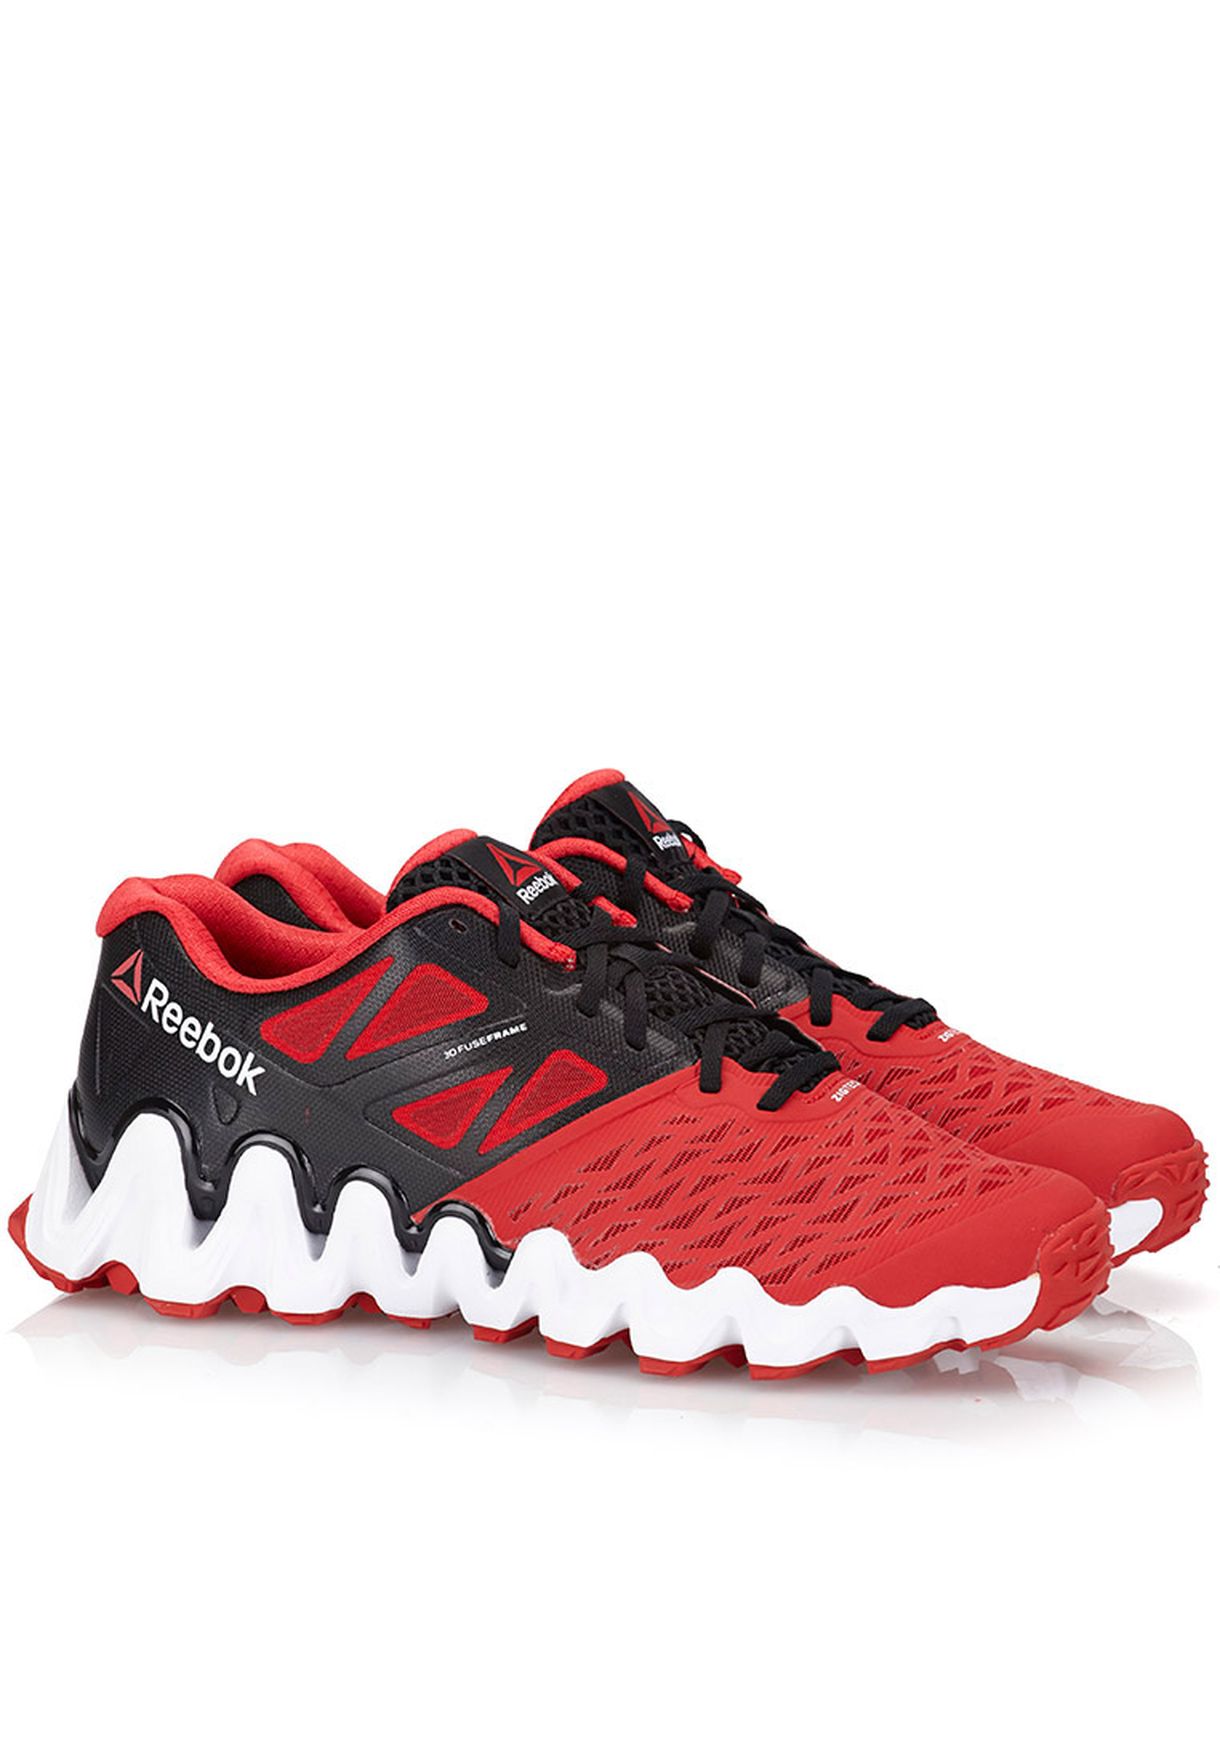 reebok zigtech red and black